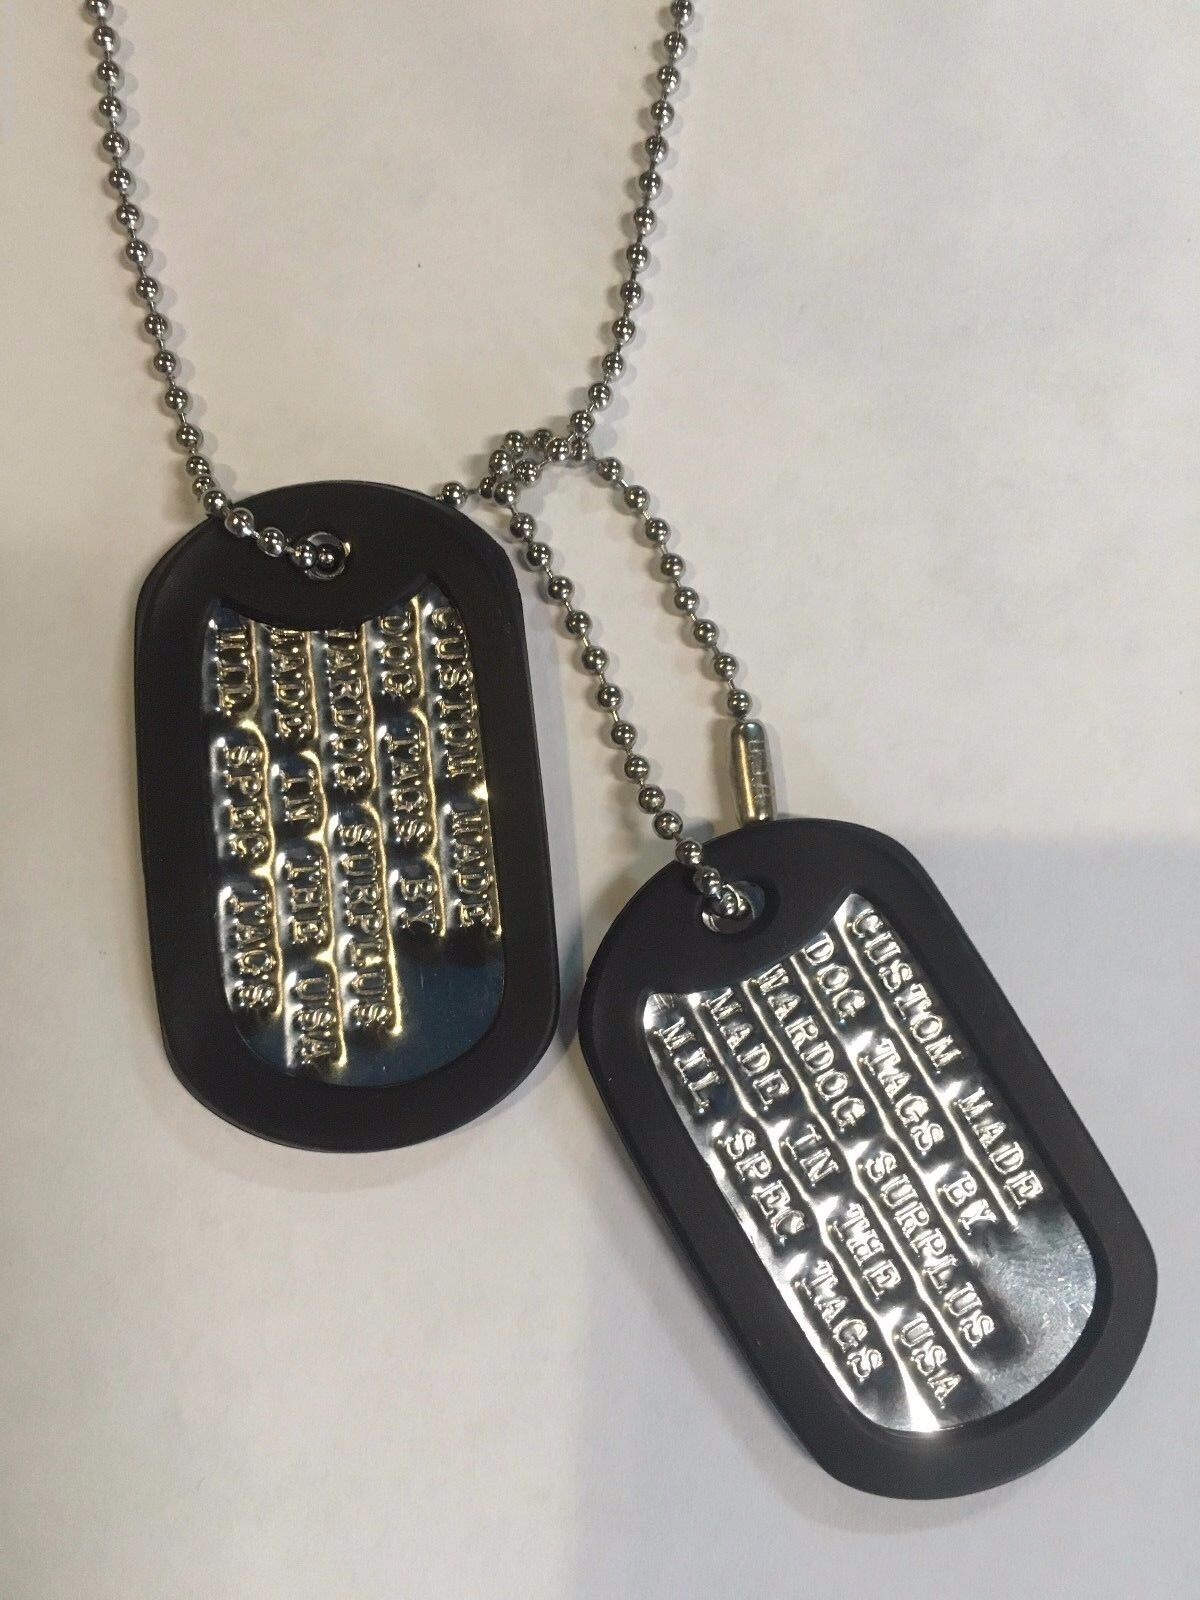 MILITARY PERSONALIZED DOG TAGS BALL CHAIN & SILENCERS OFFICIAL GI ARMY / USMC